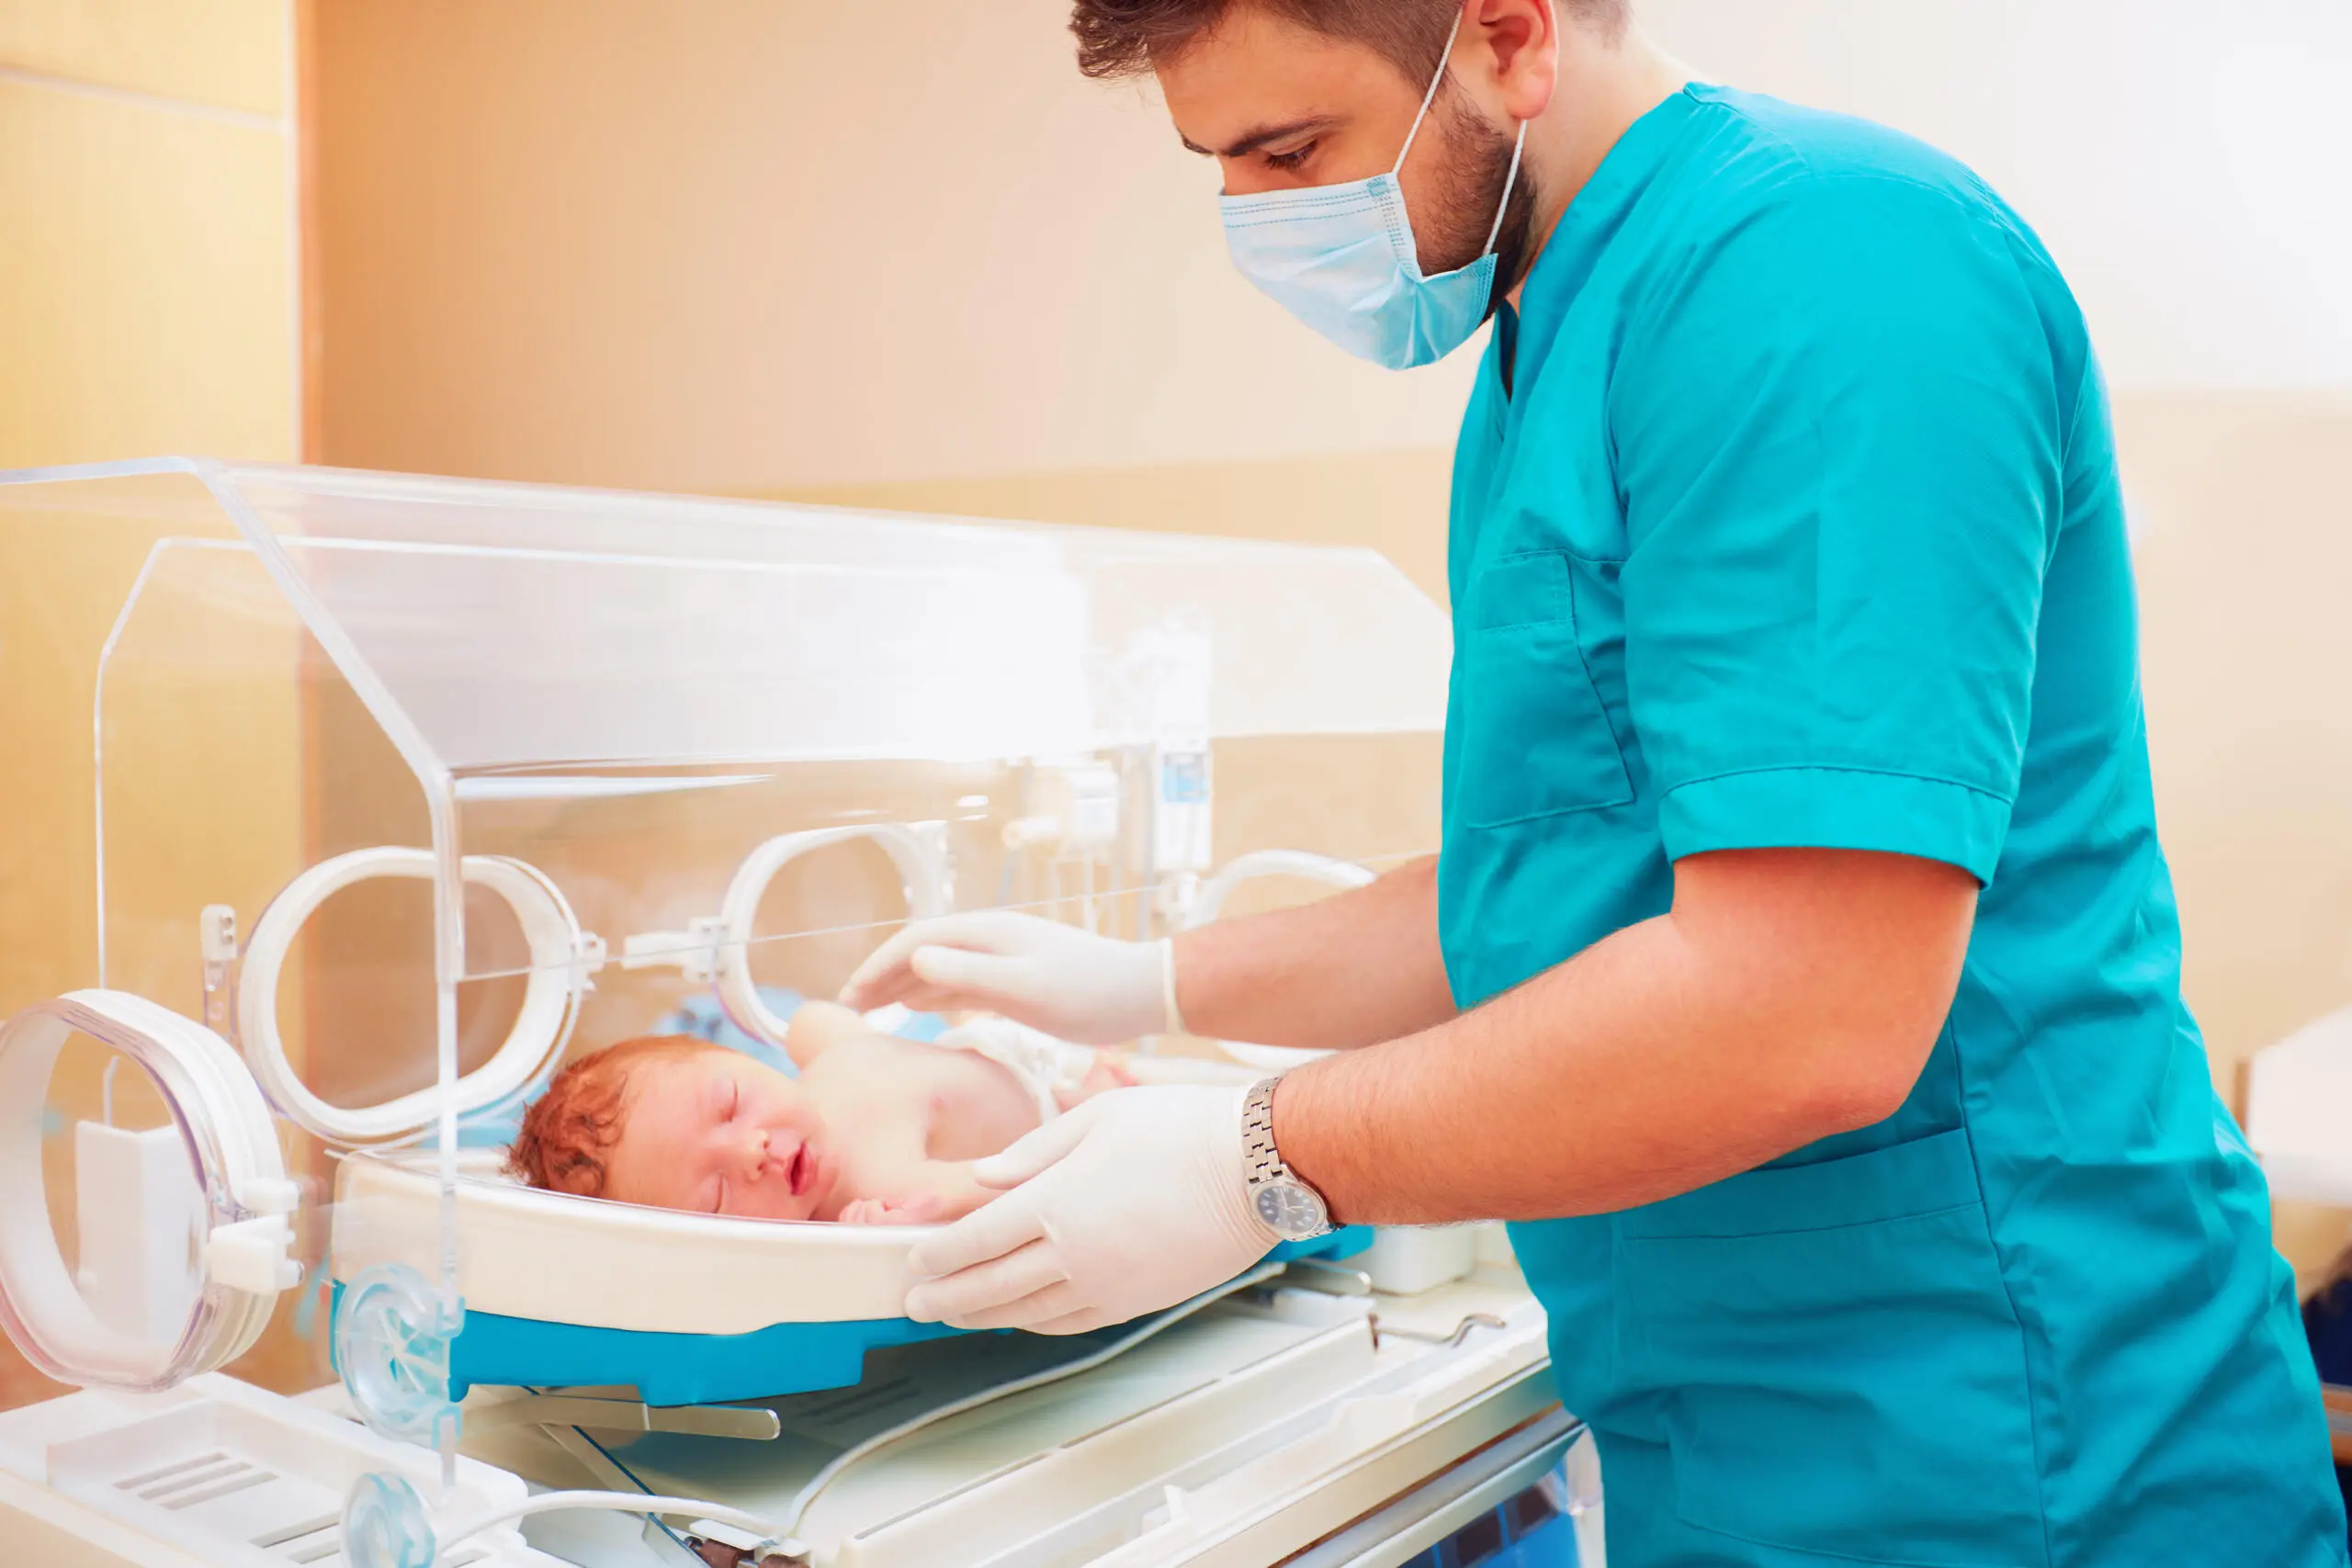 Does Your Baby Need Neonatal Care?